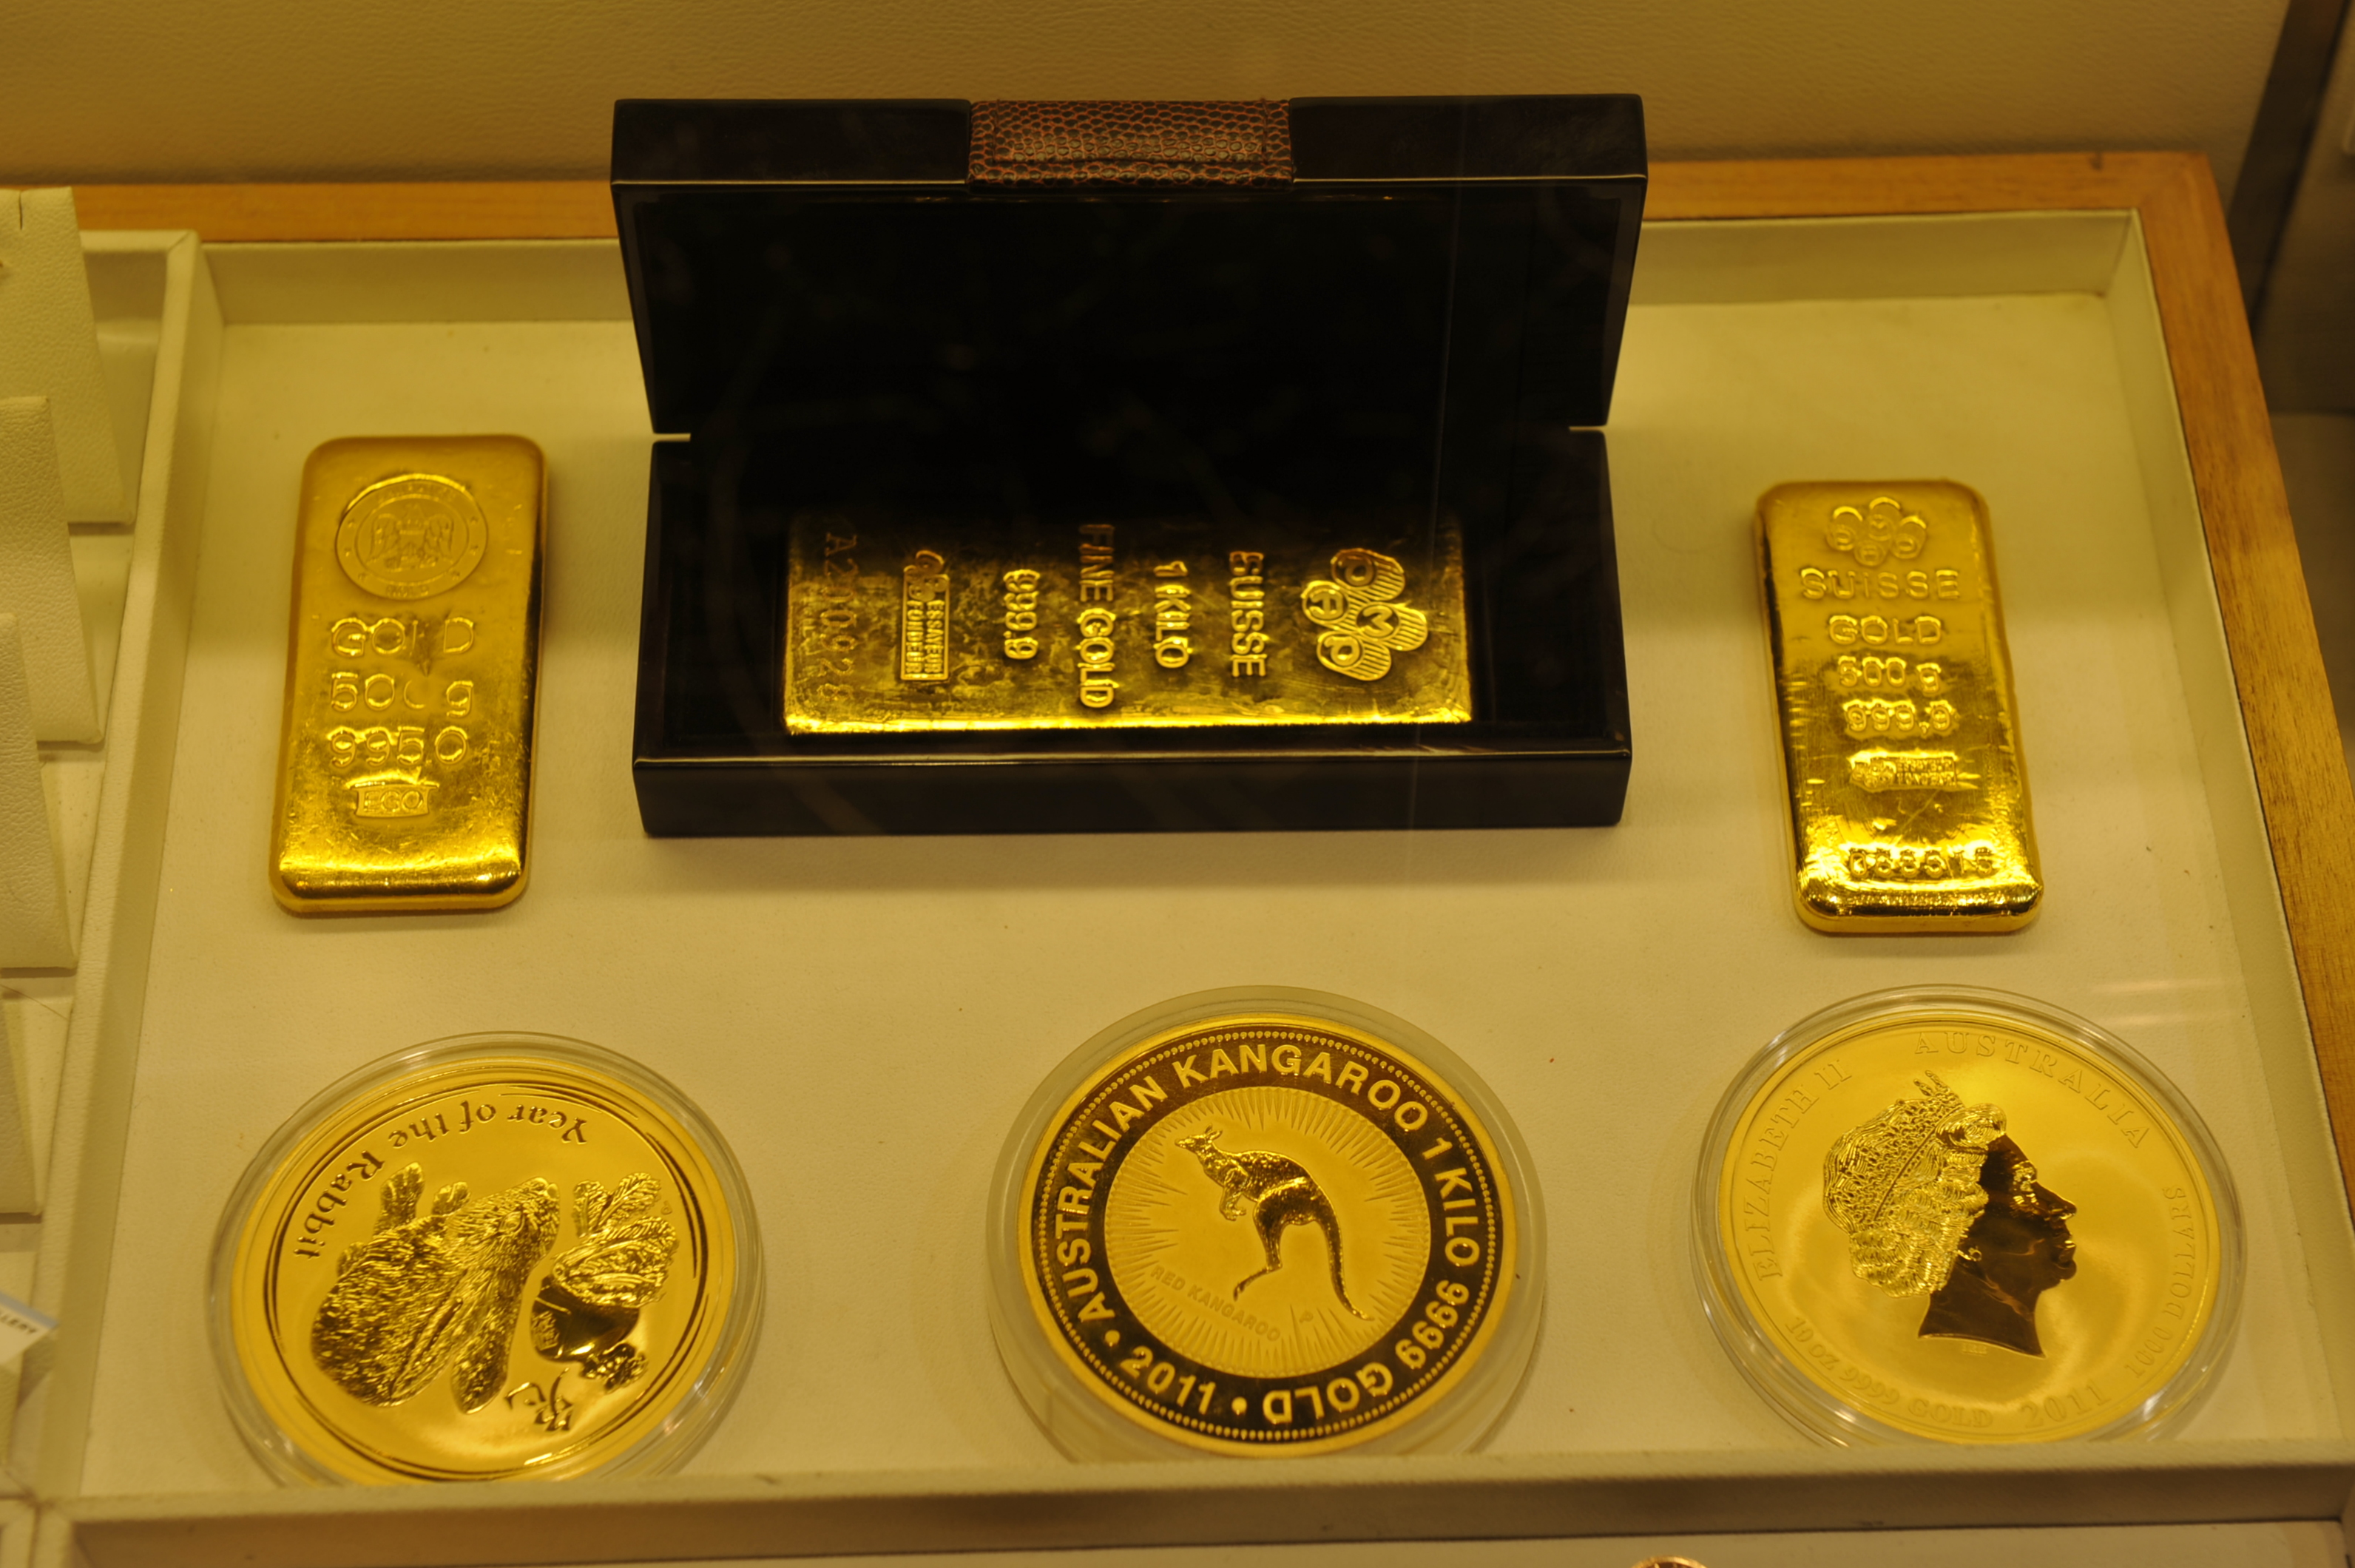 Gold bars or coins